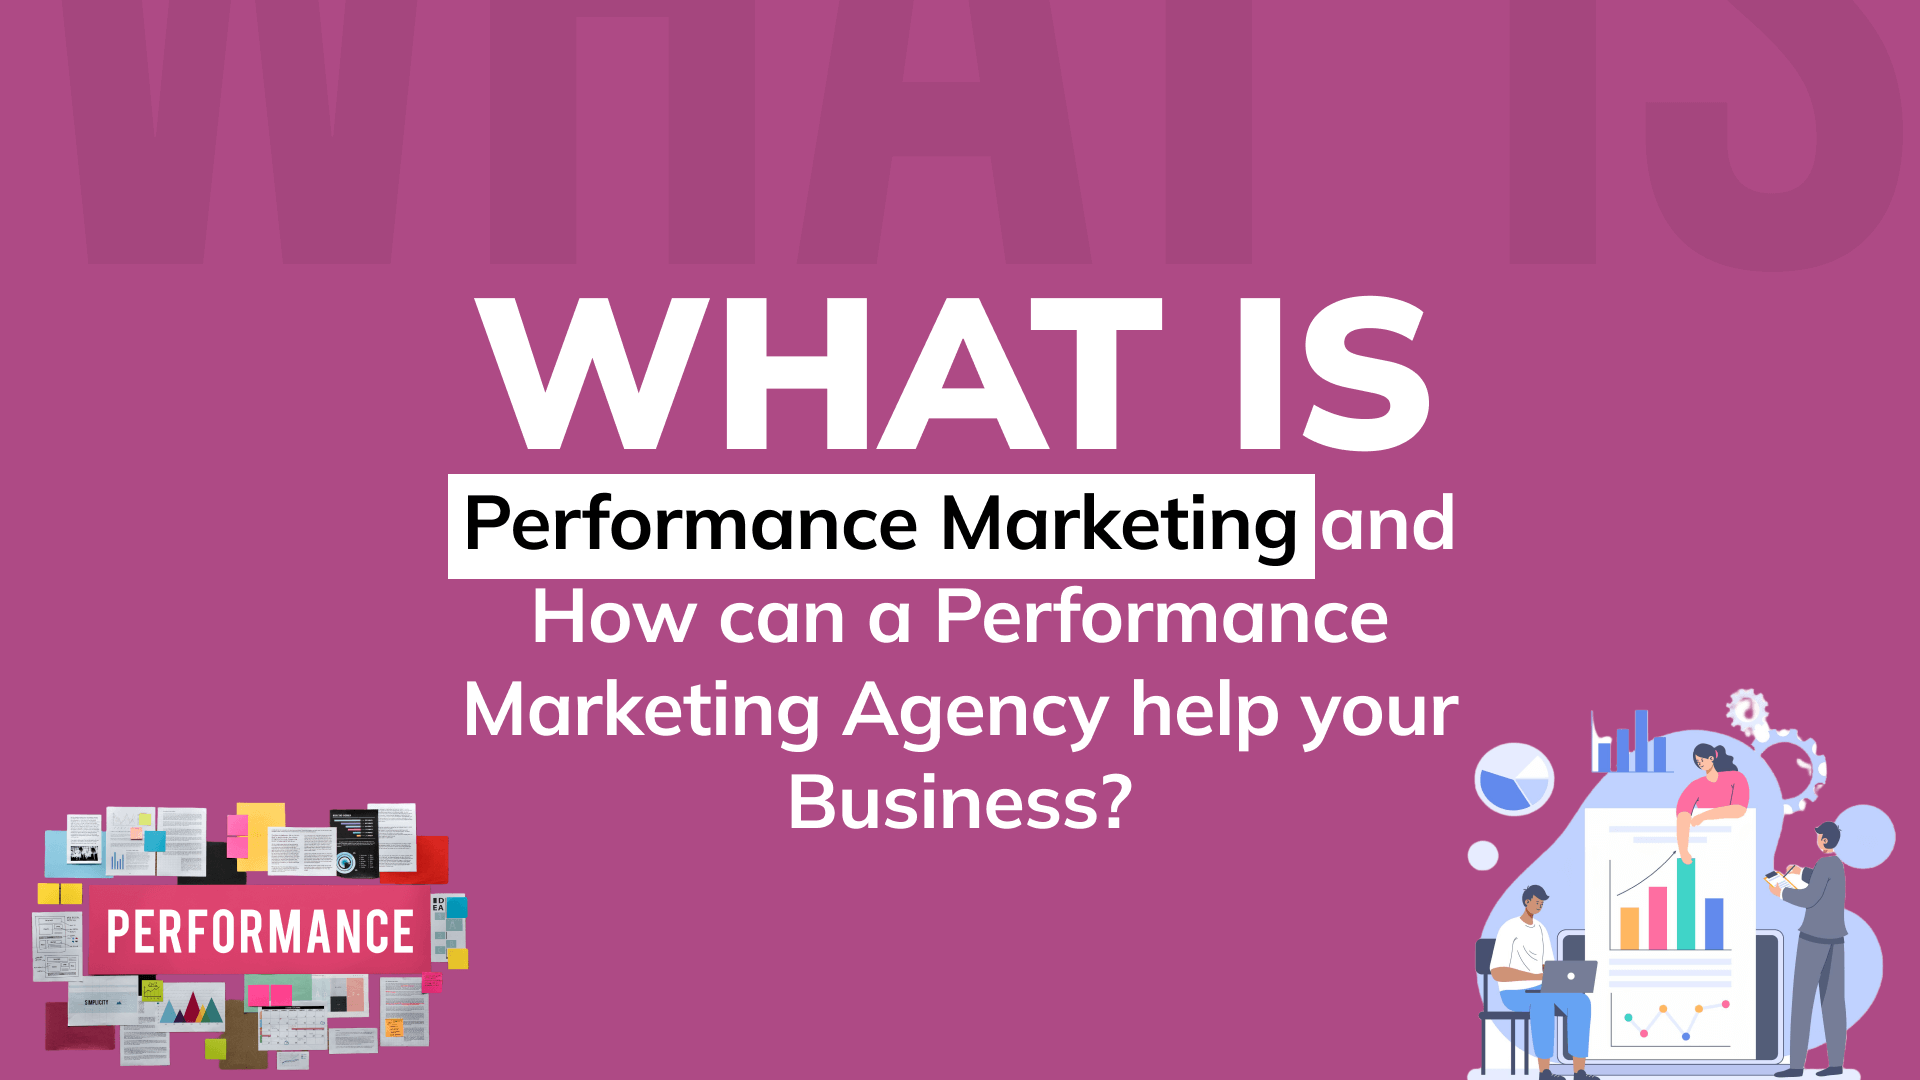 What Is Performance Marketing And How Performance Marketing Agency Help?